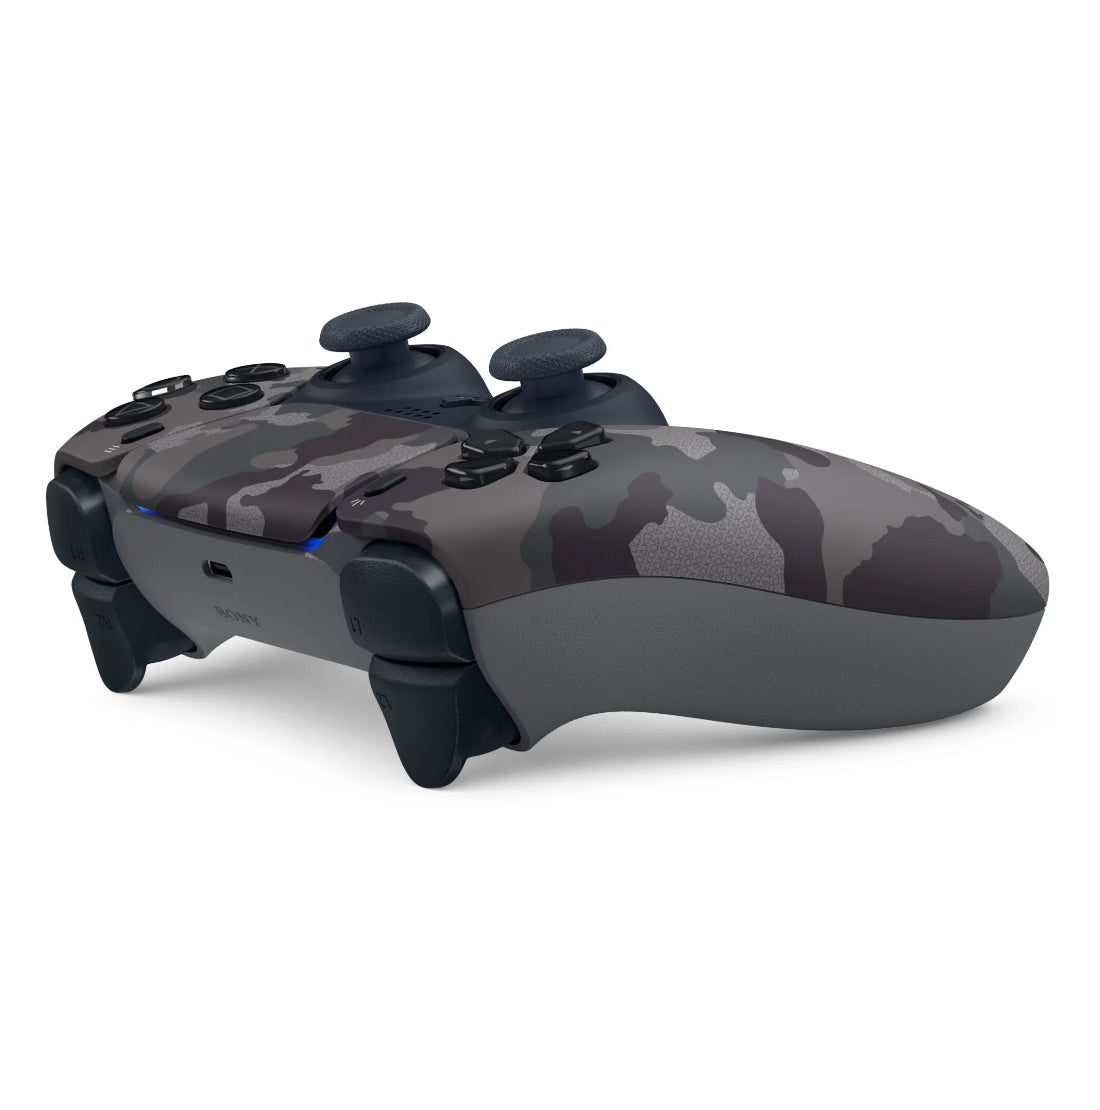 Sony Playstation 5 Digital Edition with Extra Gray Camo Controller and FPS Grip Kit Bundle - Pro-Distributing